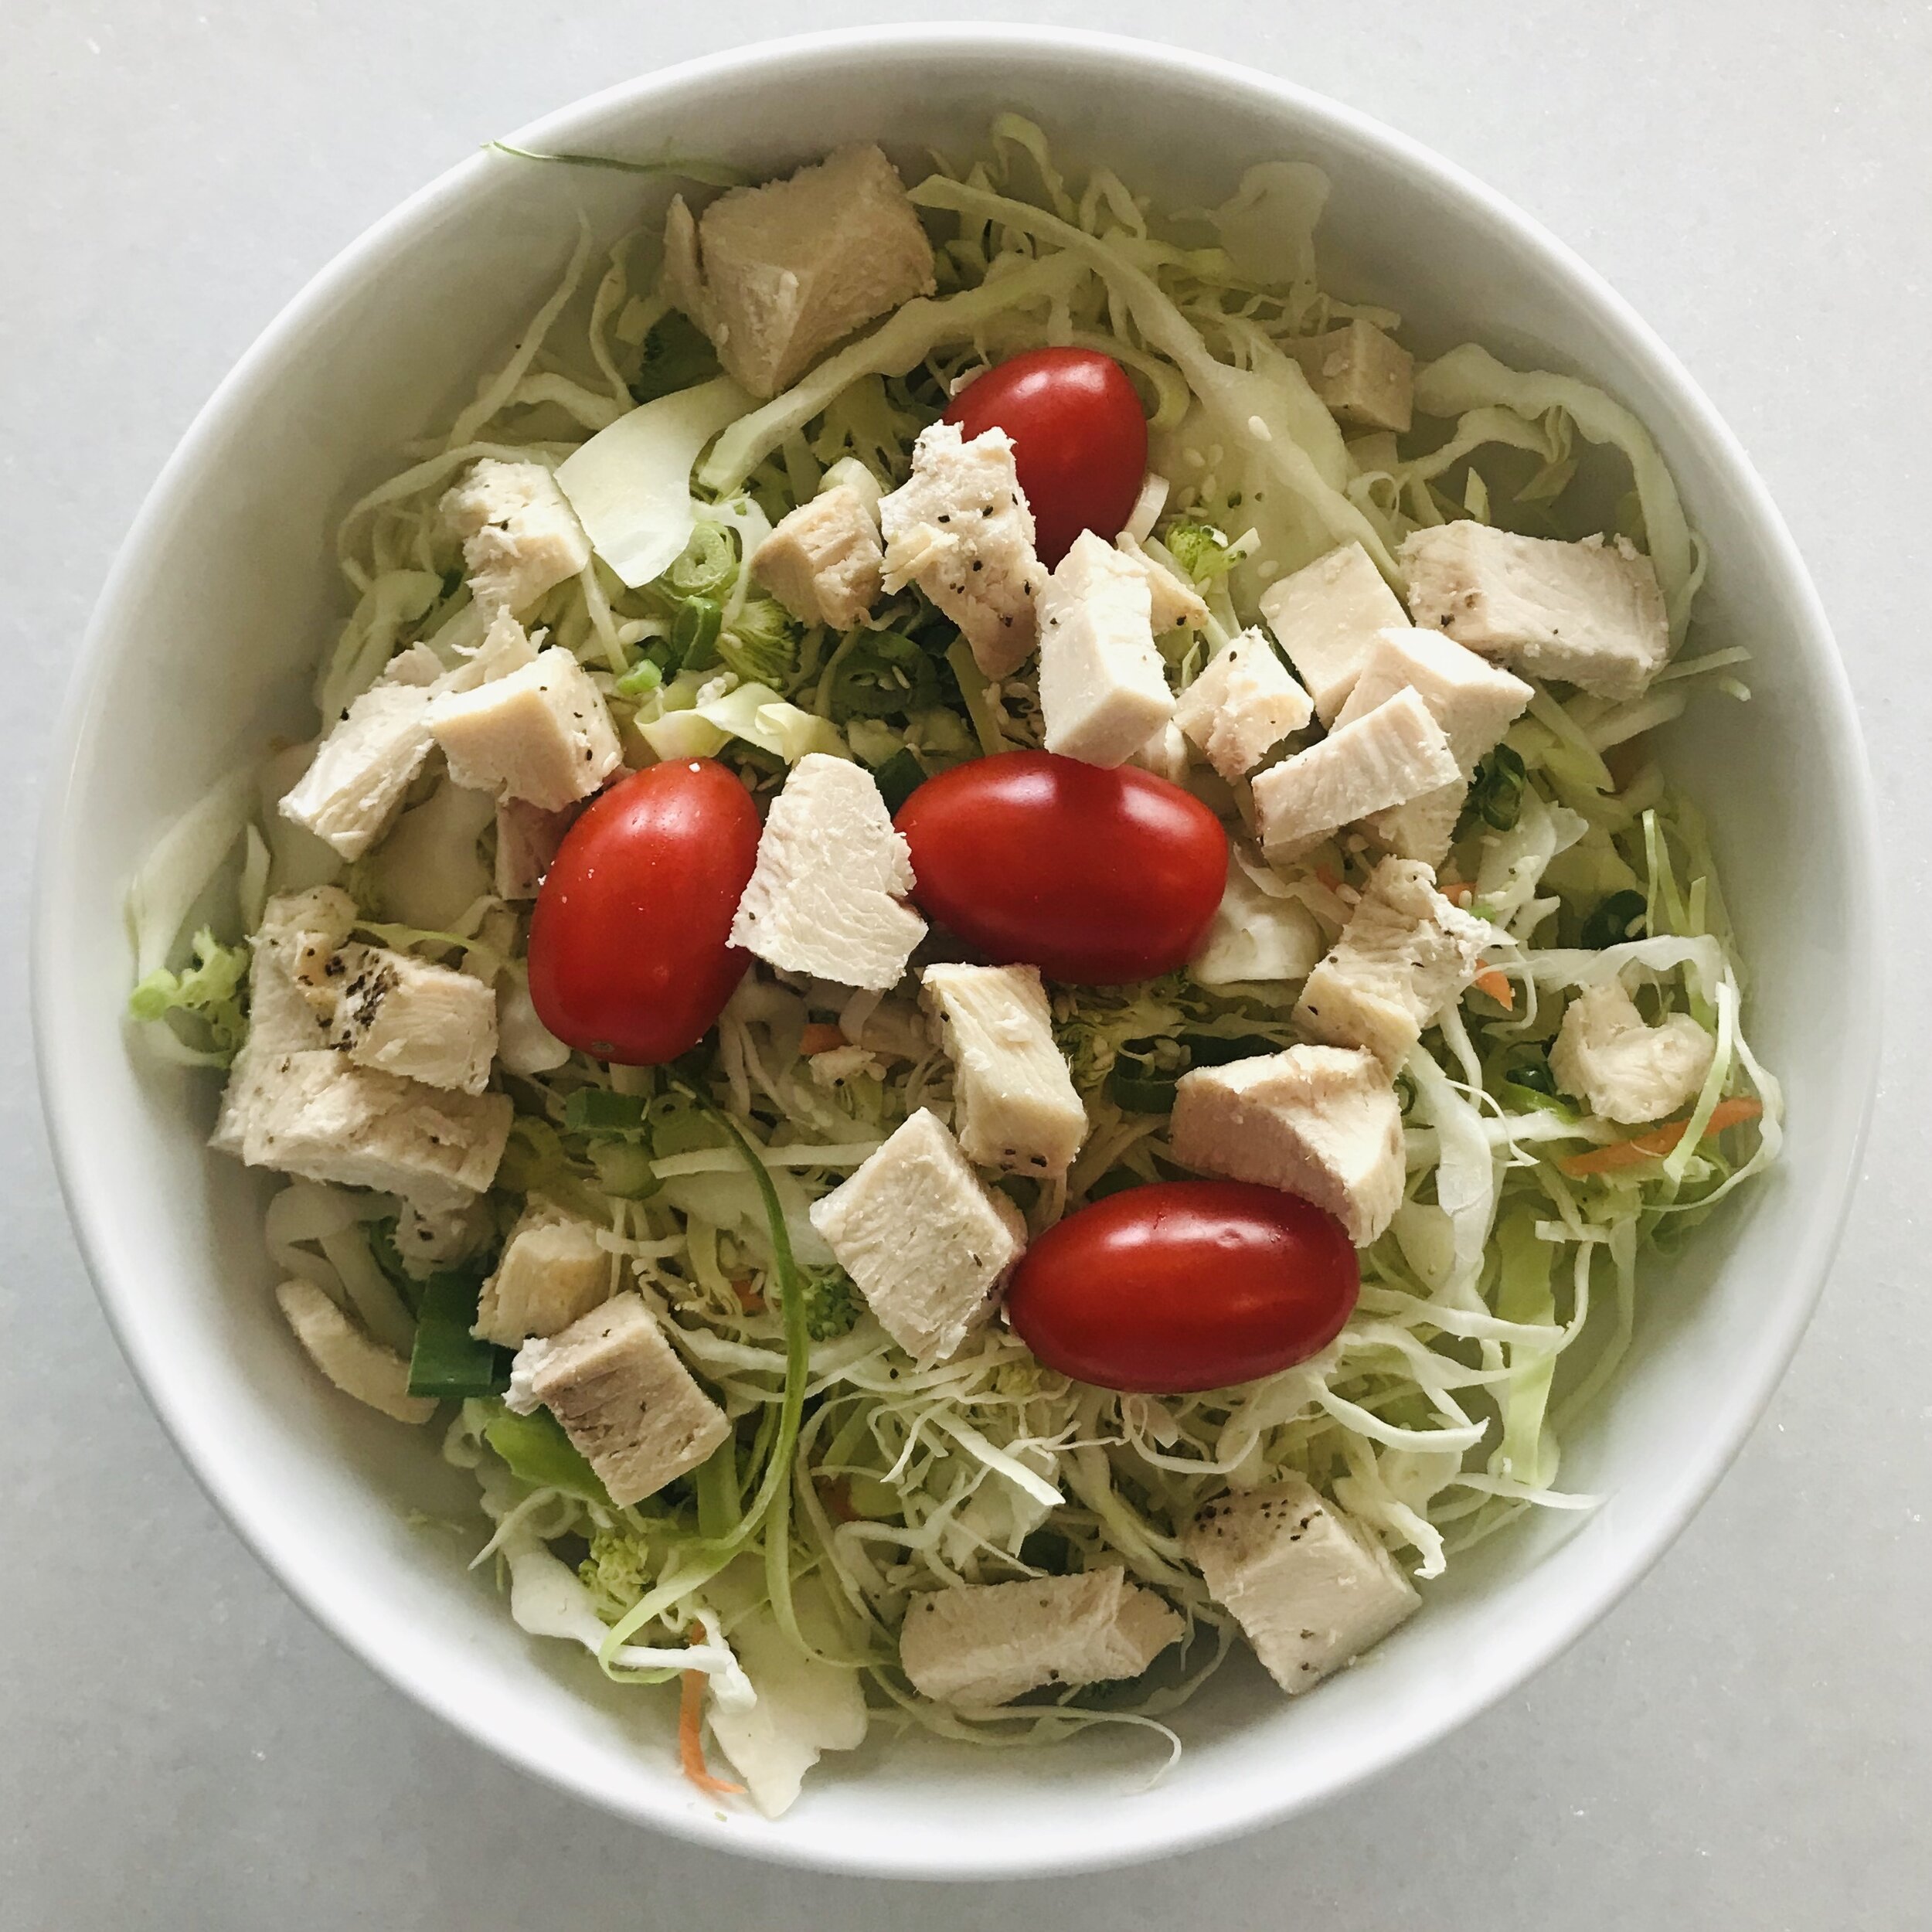 Mary's Asian Salad with Chicken